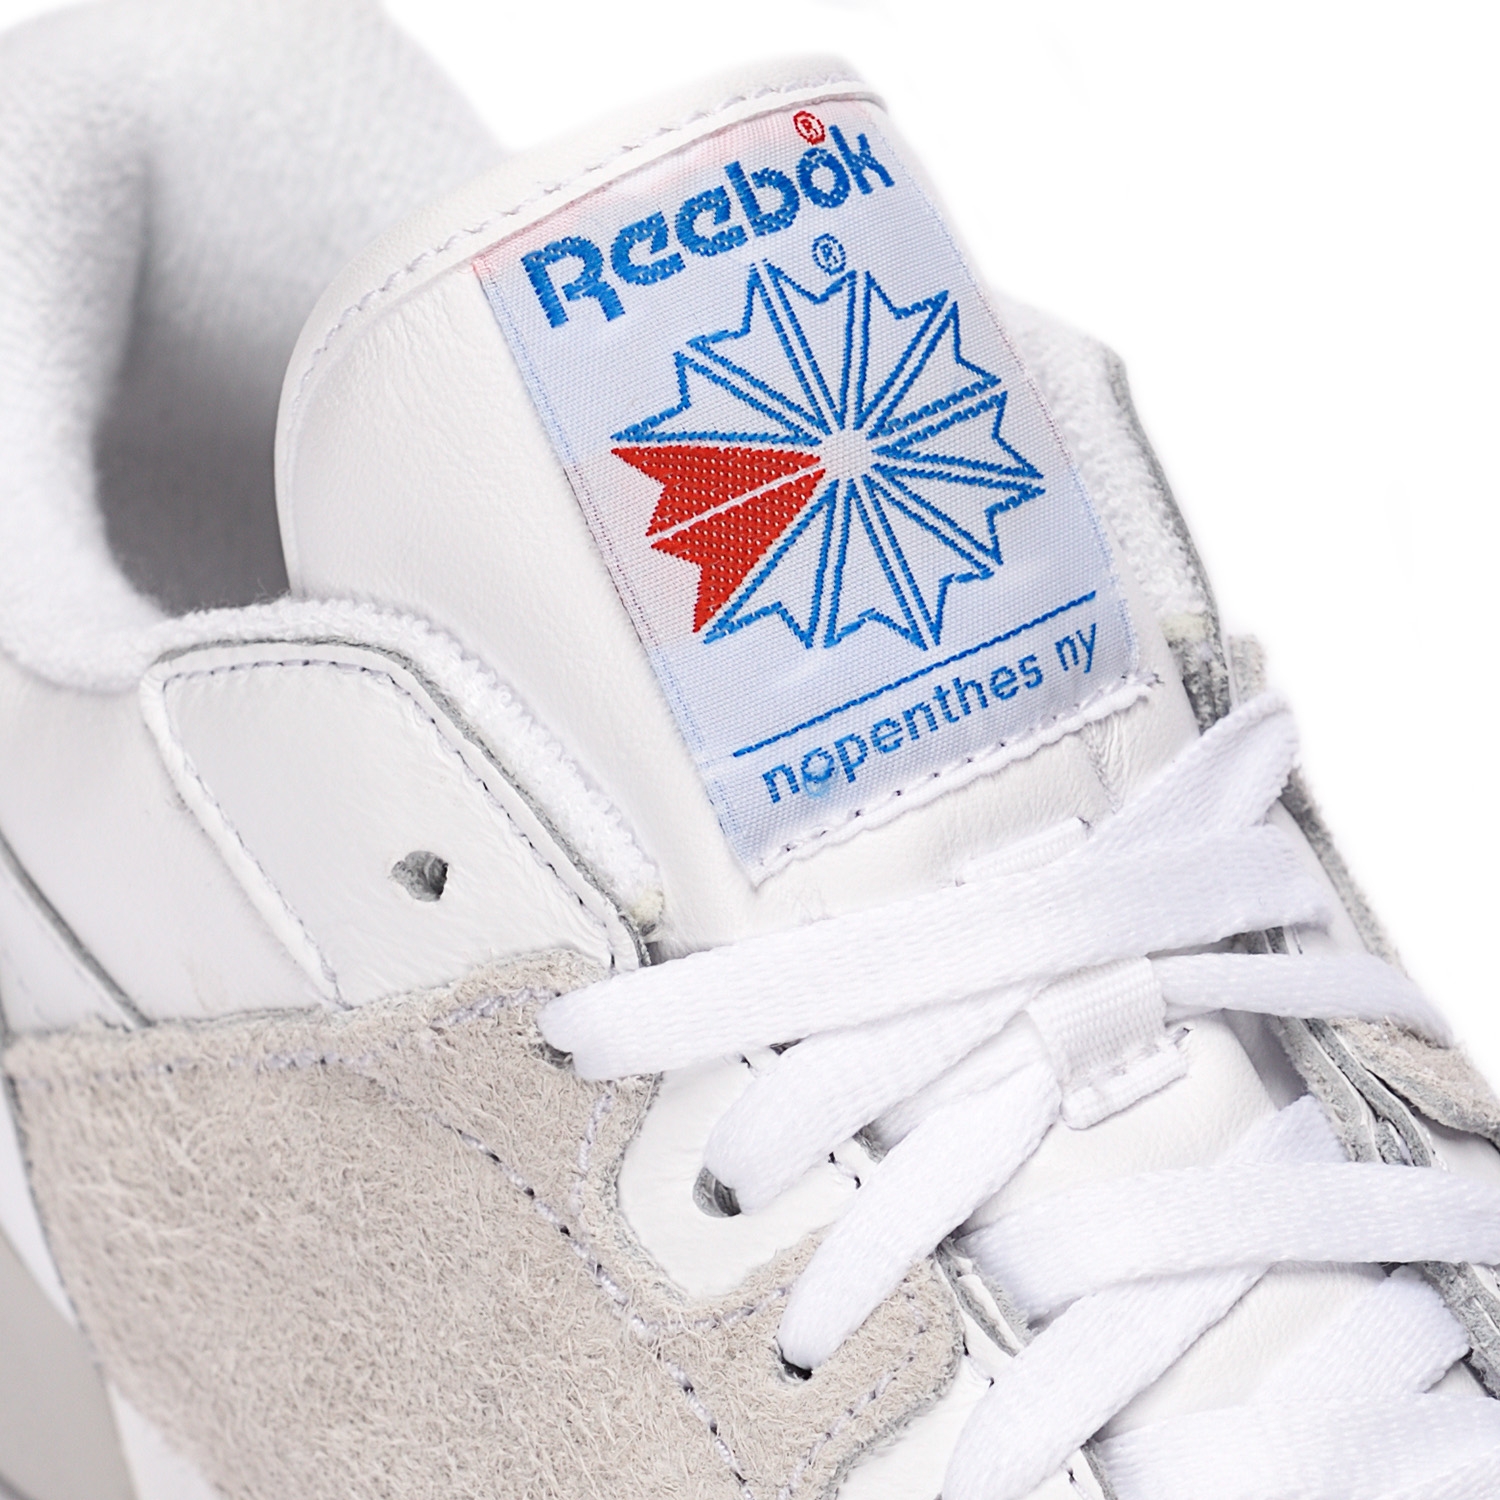 REEBOK X NEPENTHES NY WHITE/STEEL/BLUE/CORE